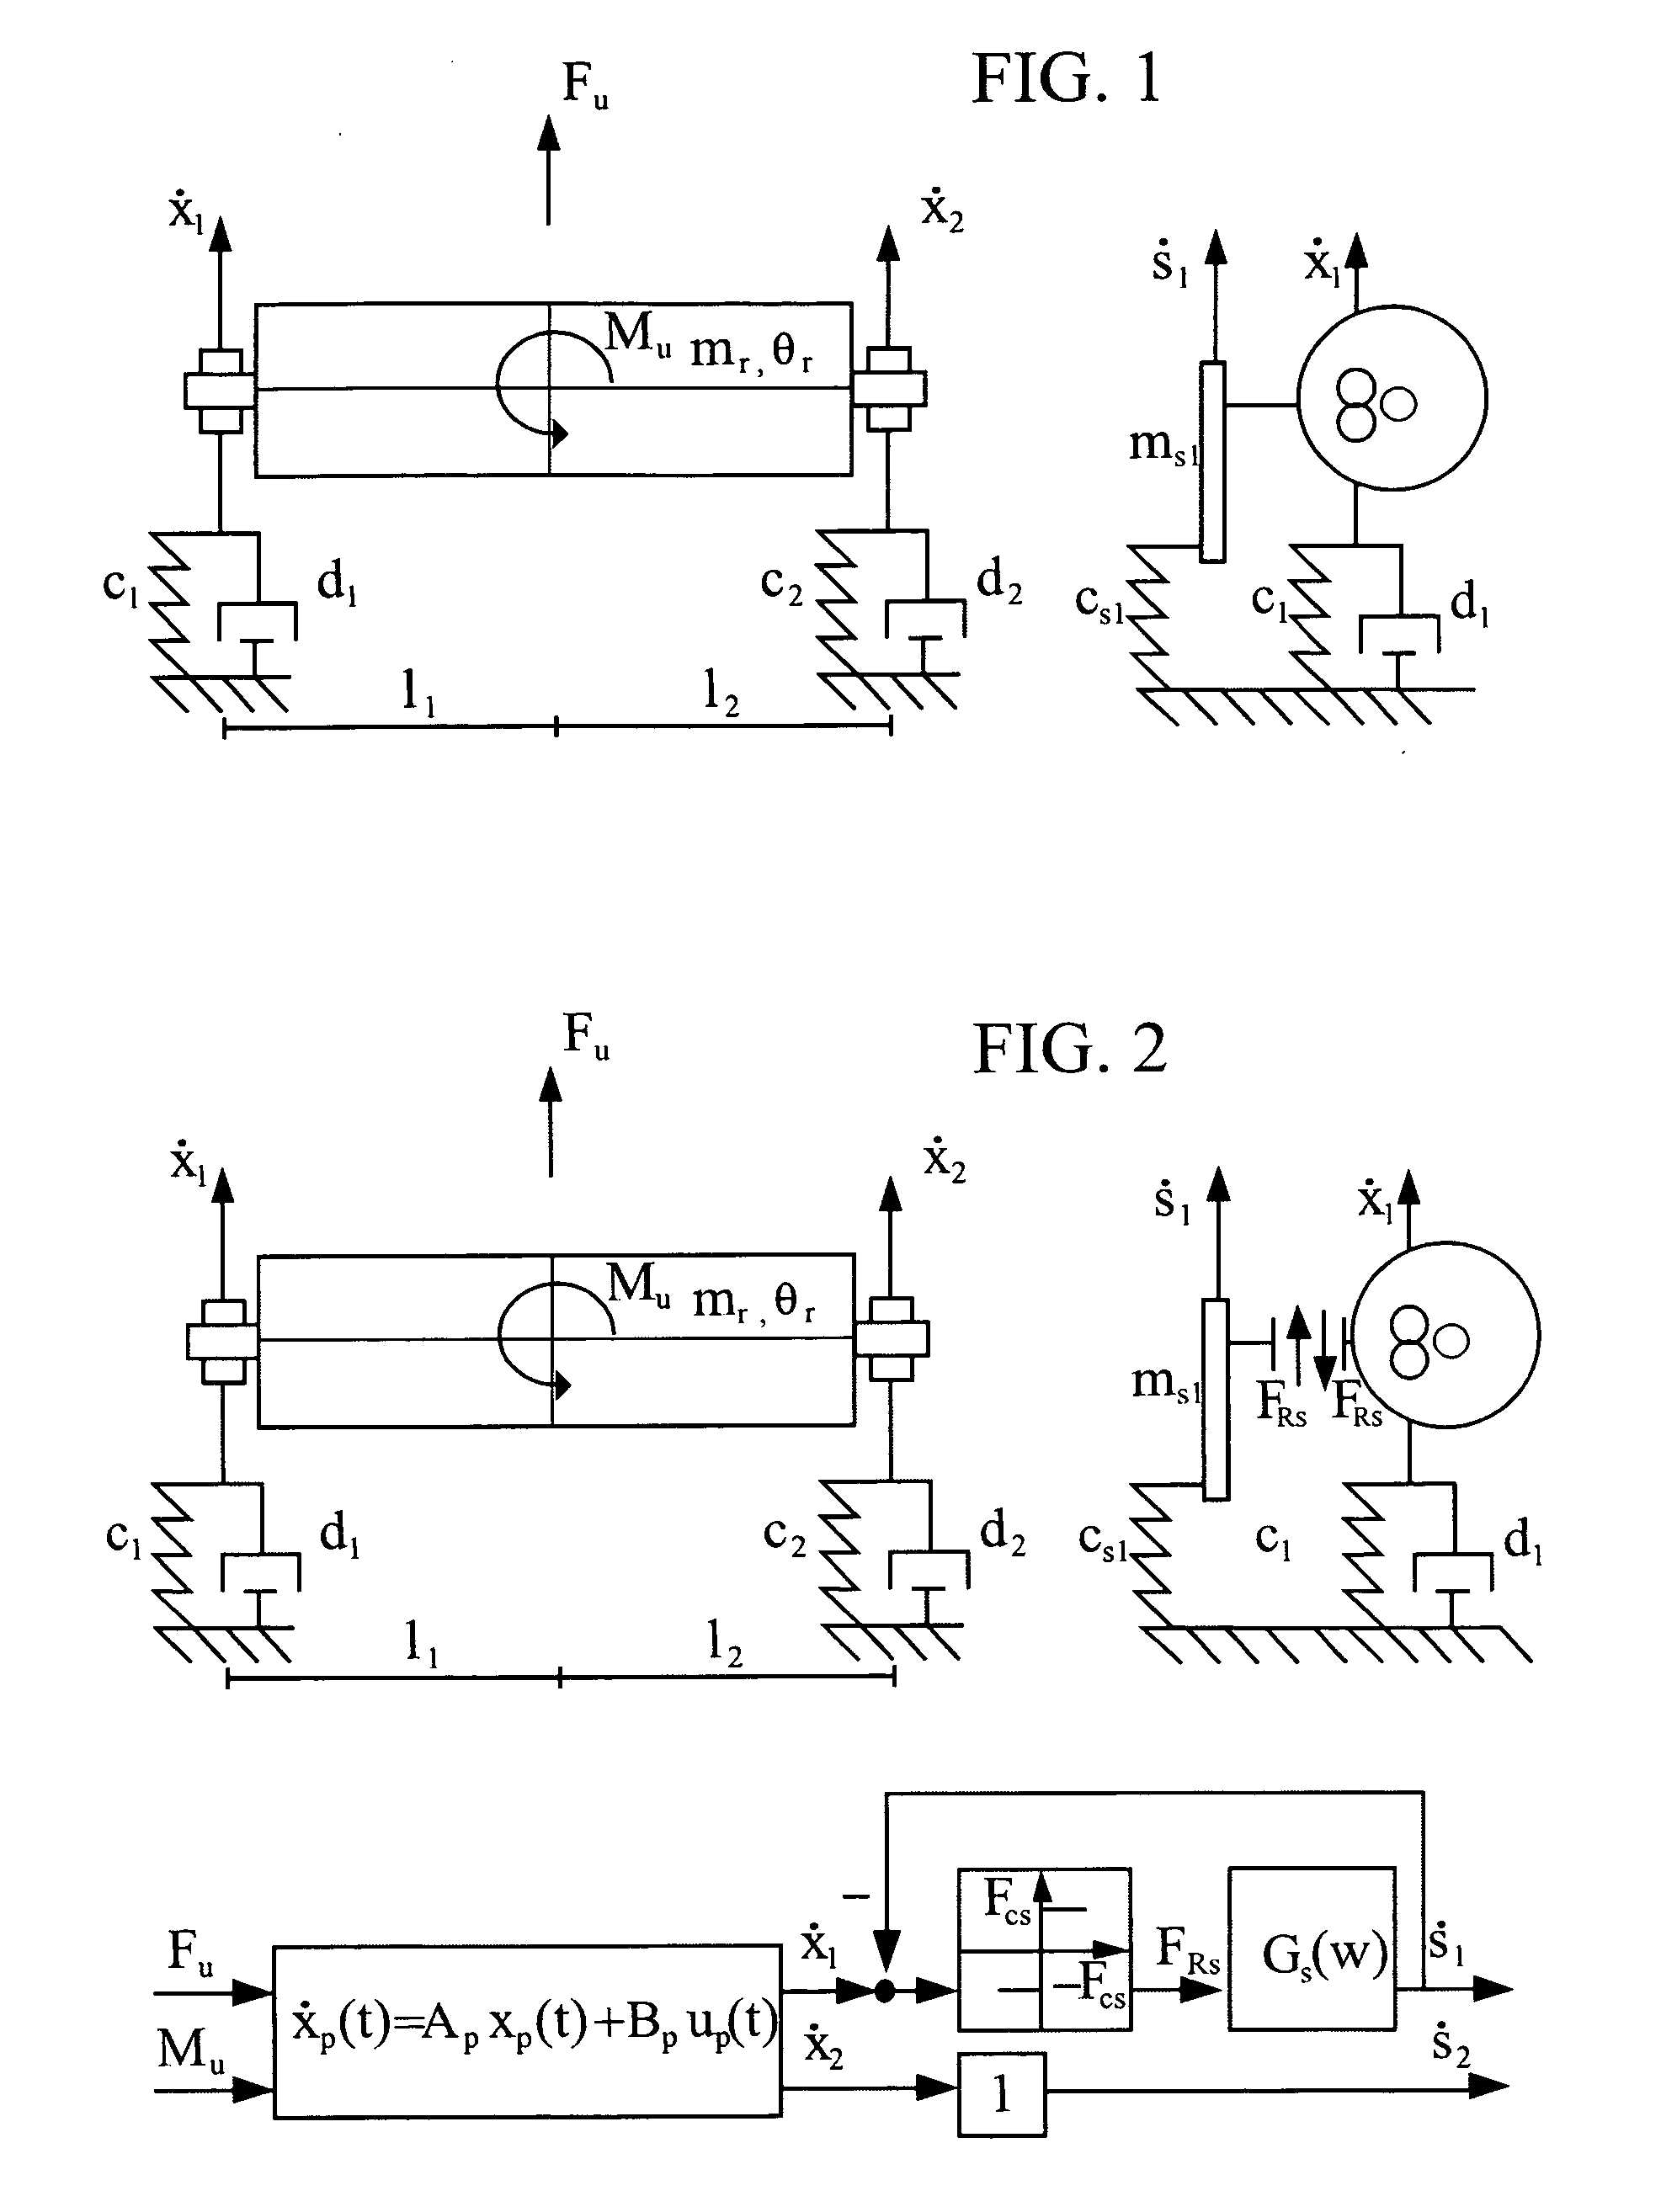 Method for fault detection and diagnosis of a rotary machine